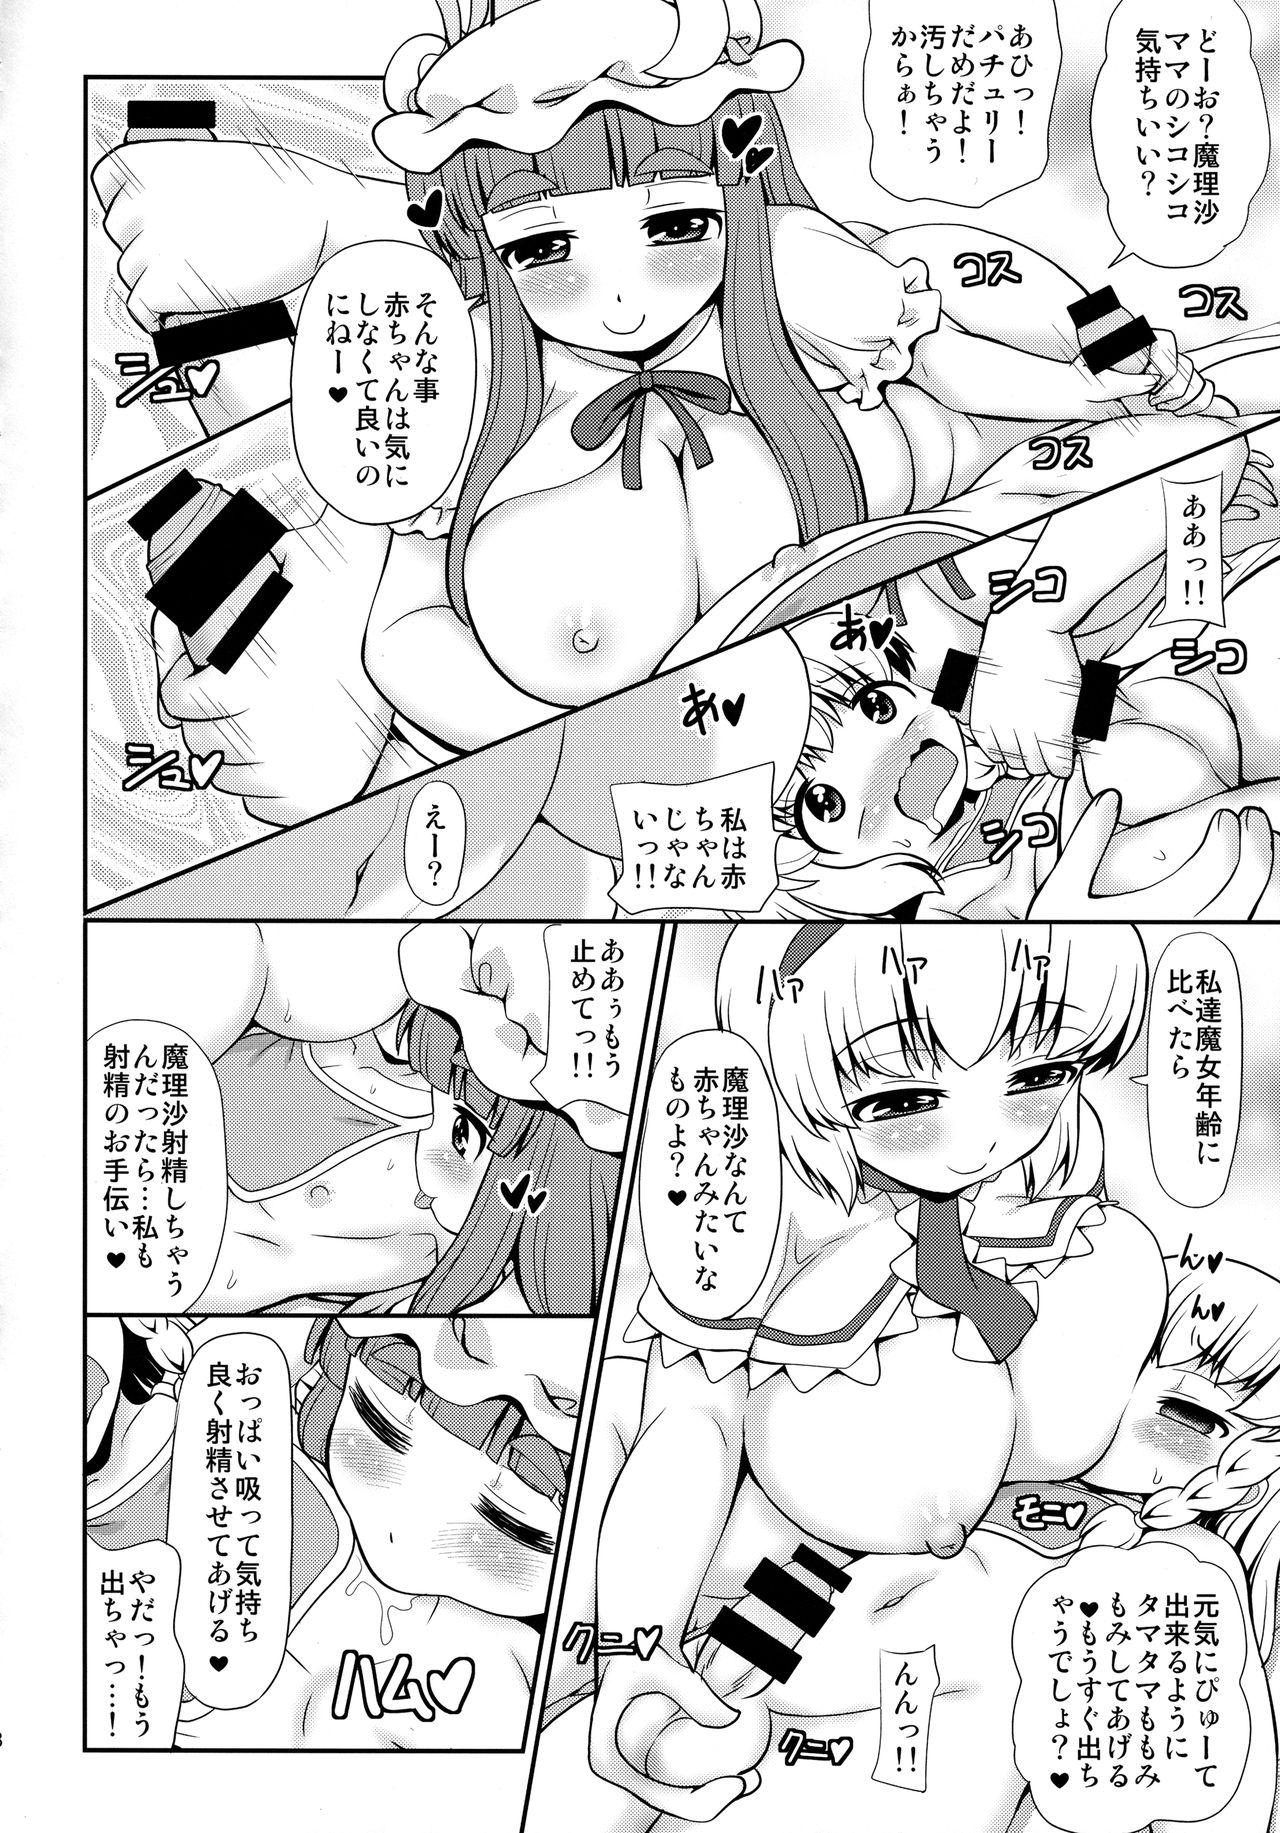 Desperate Black or Kinshi - Touhou project Doggy Style Porn - Page 7